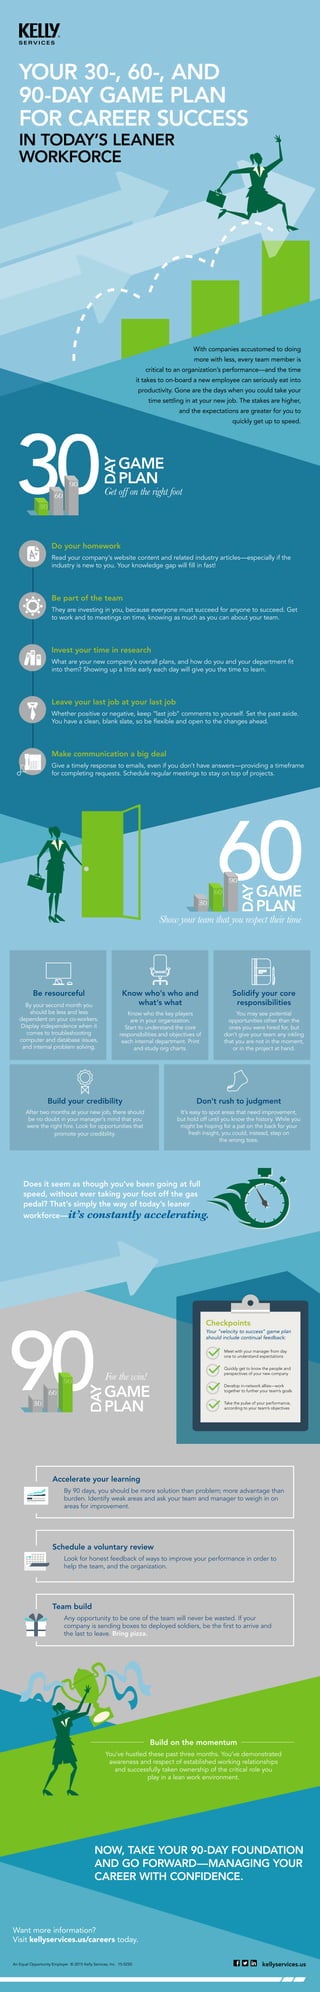 YOUR 30-, 60-, AND
90-DAY GAME PLAN
FOR CAREER SUCCESS
IN TODAY’S LEANER
WORKFORCE
kellyservices.us
With companies accustomed to doing
more with less, every team member is
critical to an organization’s performance—and the time
it takes to on-board a new employee can seriously eat into
productivity. Gone are the days when you could take your
time settling in at your new job. The stakes are higher,
and the expectations are greater for you to
quickly get up to speed.
Do your homework
Read your company’s website content and related industry articles—especially if the
industry is new to you. Your knowledge gap will fill in fast!
Be part of the team
They are investing in you, because everyone must succeed for anyone to succeed. Get
to work and to meetings on time, knowing as much as you can about your team.
Invest your time in research
What are your new company’s overall plans, and how do you and your department fit
into them? Showing up a little early each day will give you the time to learn.
Get off on the right foot
Leave your last job at your last job
Whether positive or negative, keep “last job” comments to yourself. Set the past aside.
You have a clean, blank slate, so be flexible and open to the changes ahead.
Make communication a big deal
Give a timely response to emails, even if you don’t have answers—providing a timeframe
for completing requests. Schedule regular meetings to stay on top of projects.
Show your team that you respect their time
Build your credibility
After two months at your new job, there should
be no doubt in your manager’s mind that you
were the right hire. Look for opportunities that
promote your credibility.
Be resourceful
By your second month you
should be less and less
dependent on your co-workers.
Display independence when it
comes to troubleshooting
computer and database issues,
and internal problem solving.
Know who’s who and
what’s what
Know who the key players
are in your organization.
Start to understand the core
responsibilities and objectives of
each internal department. Print
and study org charts.
Solidify your core
responsibilities
You may see potential
opportunities other than the
ones you were hired for, but
don’t give your team any inkling
that you are not in the moment,
or in the project at hand.
Don’t rush to judgment
It’s easy to spot areas that need improvement,
but hold off until you know the history. While you
might be hoping for a pat on the back for your
fresh insight, you could, instead, step on
the wrong toes.
Does it seem as though you’ve been going at full
speed, without ever taking your foot off the gas
pedal? That’s simply the way of today’s leaner
workforce—it’s constantly accelerating.
Checkpoints
Your “velocity to success” game plan
should include continual feedback:
Meet with your manager from day
one to understand expectations
Quickly get to know the people and
perspectives of your new company
Develop in-network allies—work
together to further your team’s goals
Take the pulse of your performance,
according to your team’s objectives
For the win!
Accelerate your learning
By 90 days, you should be more solution than problem; more advantage than
burden. Identify weak areas and ask your team and manager to weigh in on
areas for improvement.
Schedule a voluntary review
Look for honest feedback of ways to improve your performance in order to
help the team, and the organization.
Team build
Any opportunity to be one of the team will never be wasted. If your
company is sending boxes to deployed soldiers, be the first to arrive and
the last to leave. Bring pizza.
An Equal Opportunity Employer © 2015 Kelly Services, Inc. 15-0250
NOW, TAKE YOUR 90-DAY FOUNDATION
AND GO FORWARD—MANAGING YOUR
CAREER WITH CONFIDENCE.
Build on the momentum
You’ve hustled these past three months. You’ve demonstrated
awareness and respect of established working relationships
and successfully taken ownership of the critical role you
play in a lean work environment.
Want more information?
Visit kellyservices.us/careers today.
 